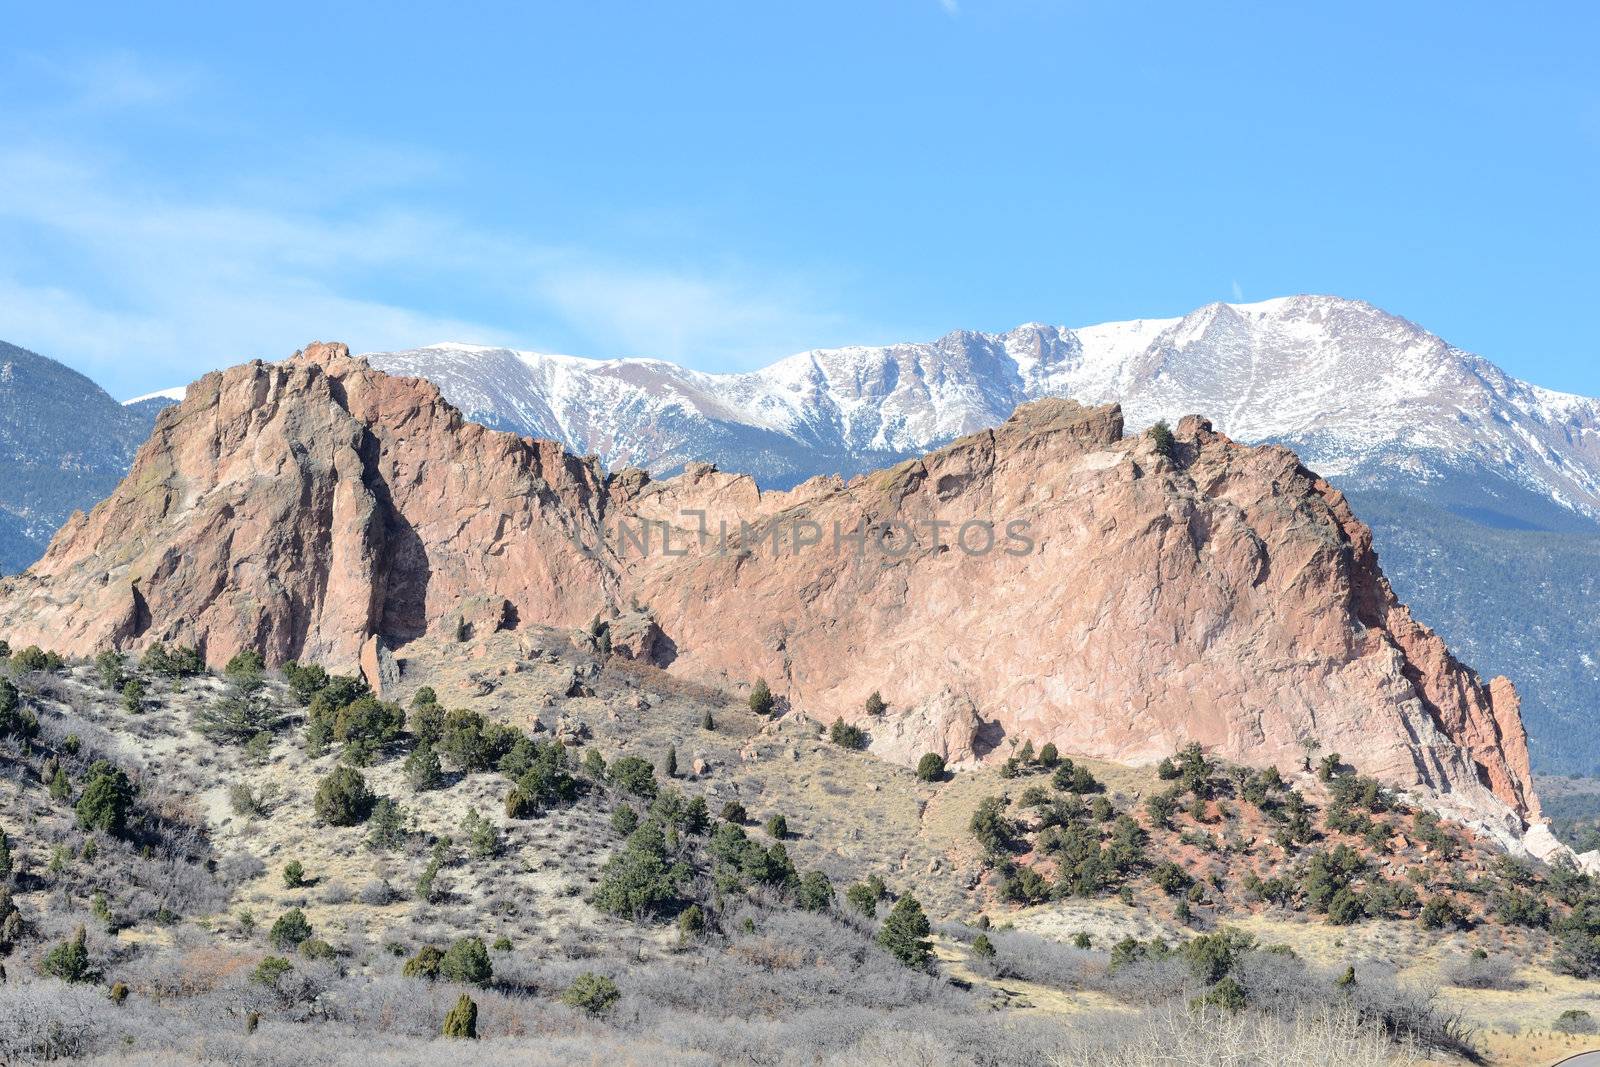 Scenic view of Pikes Peak behind Gray Rock formation of Garden Of The Gods park  by Colorado Springs, Colorado.